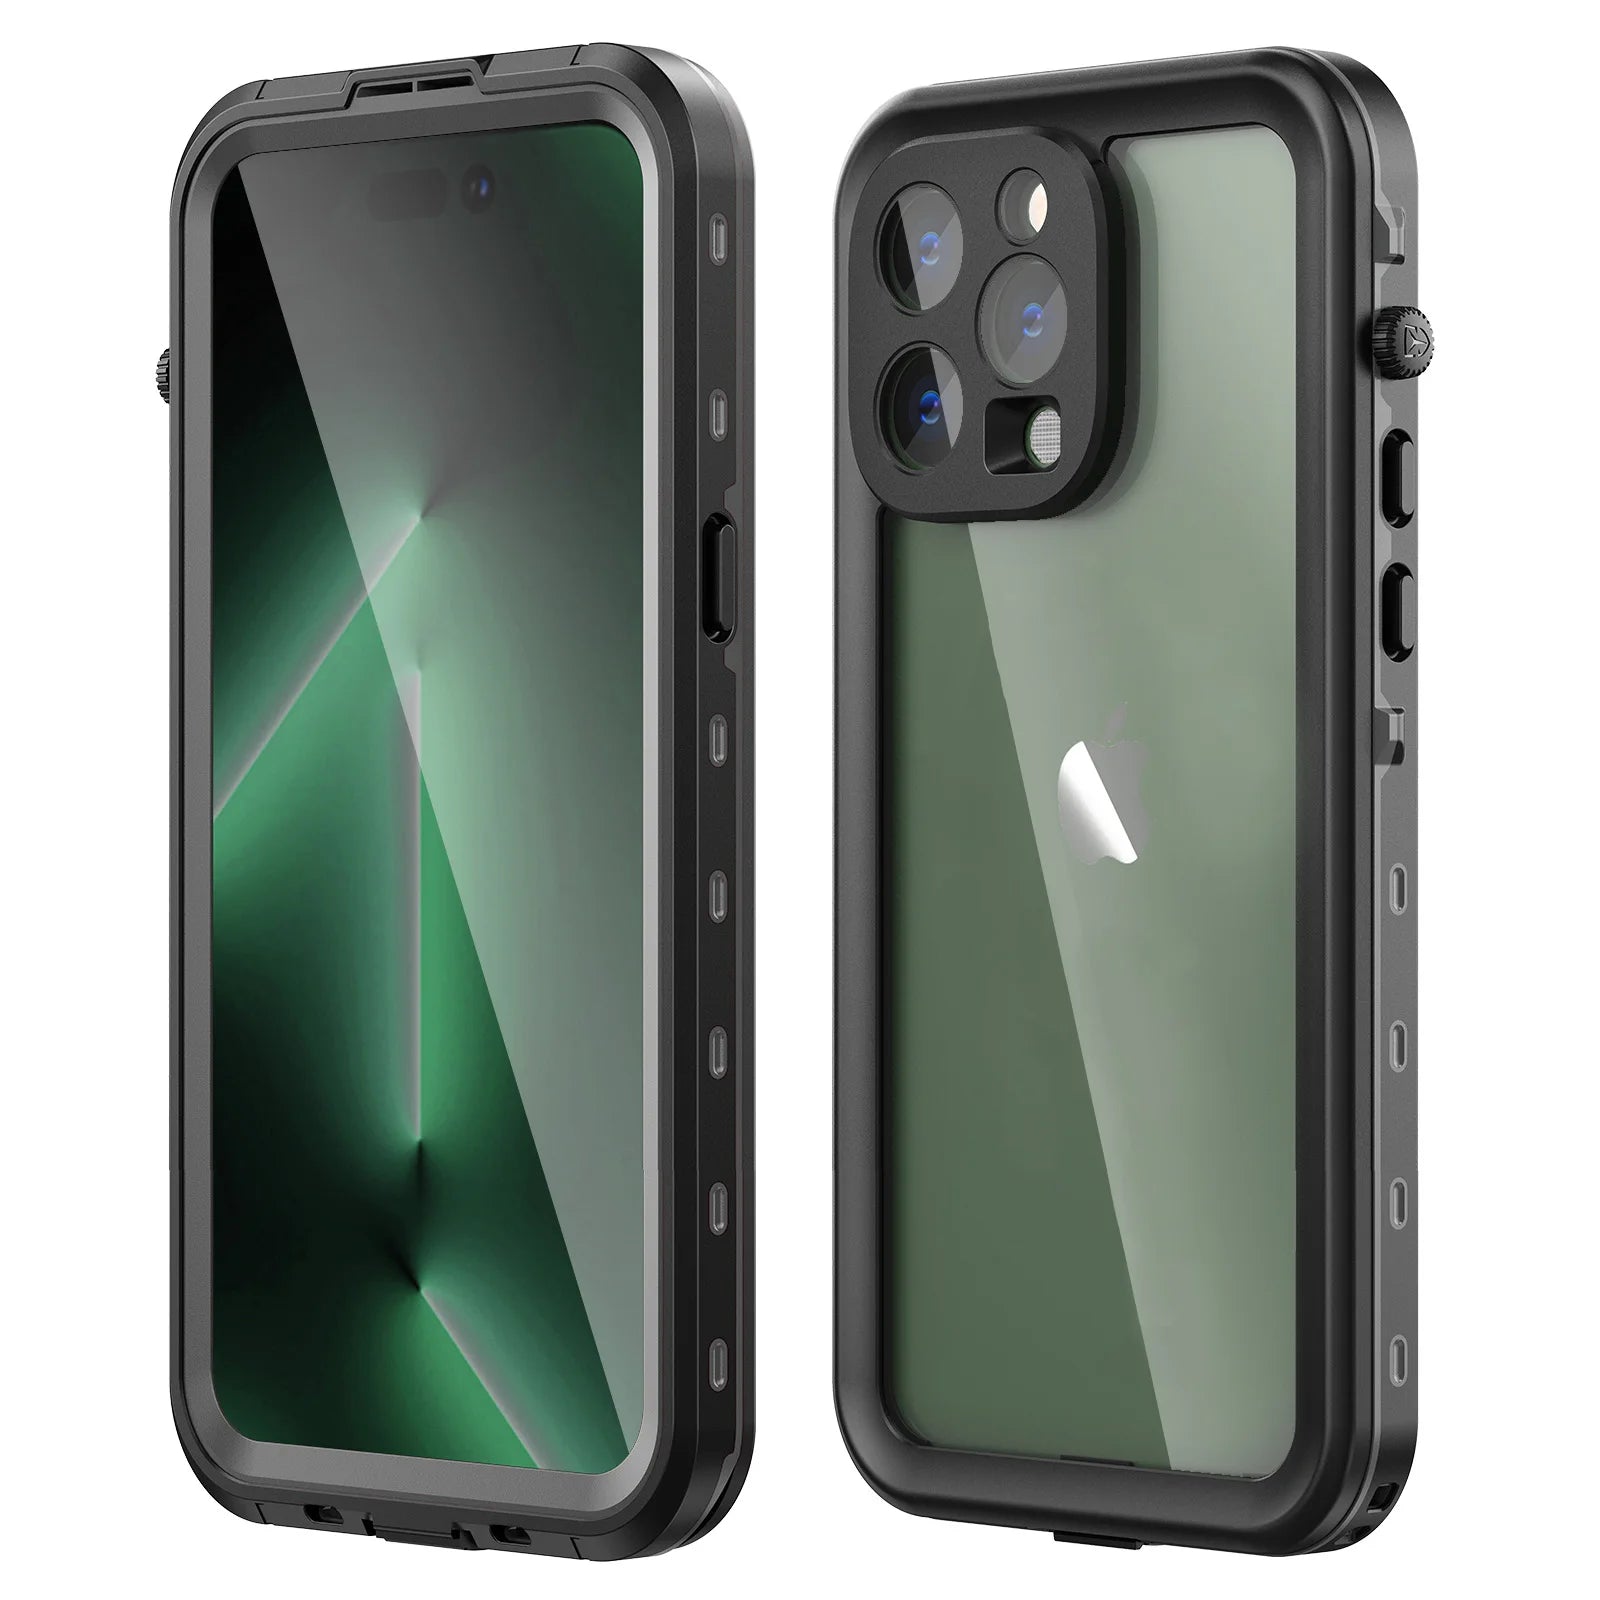 IP68 Waterproof iPhone 15/14/13/12/11 Pro Max XS Max XR SE 7/8 Case with RedPepper Cover for Diving, Underwater, and Outdoor Sports